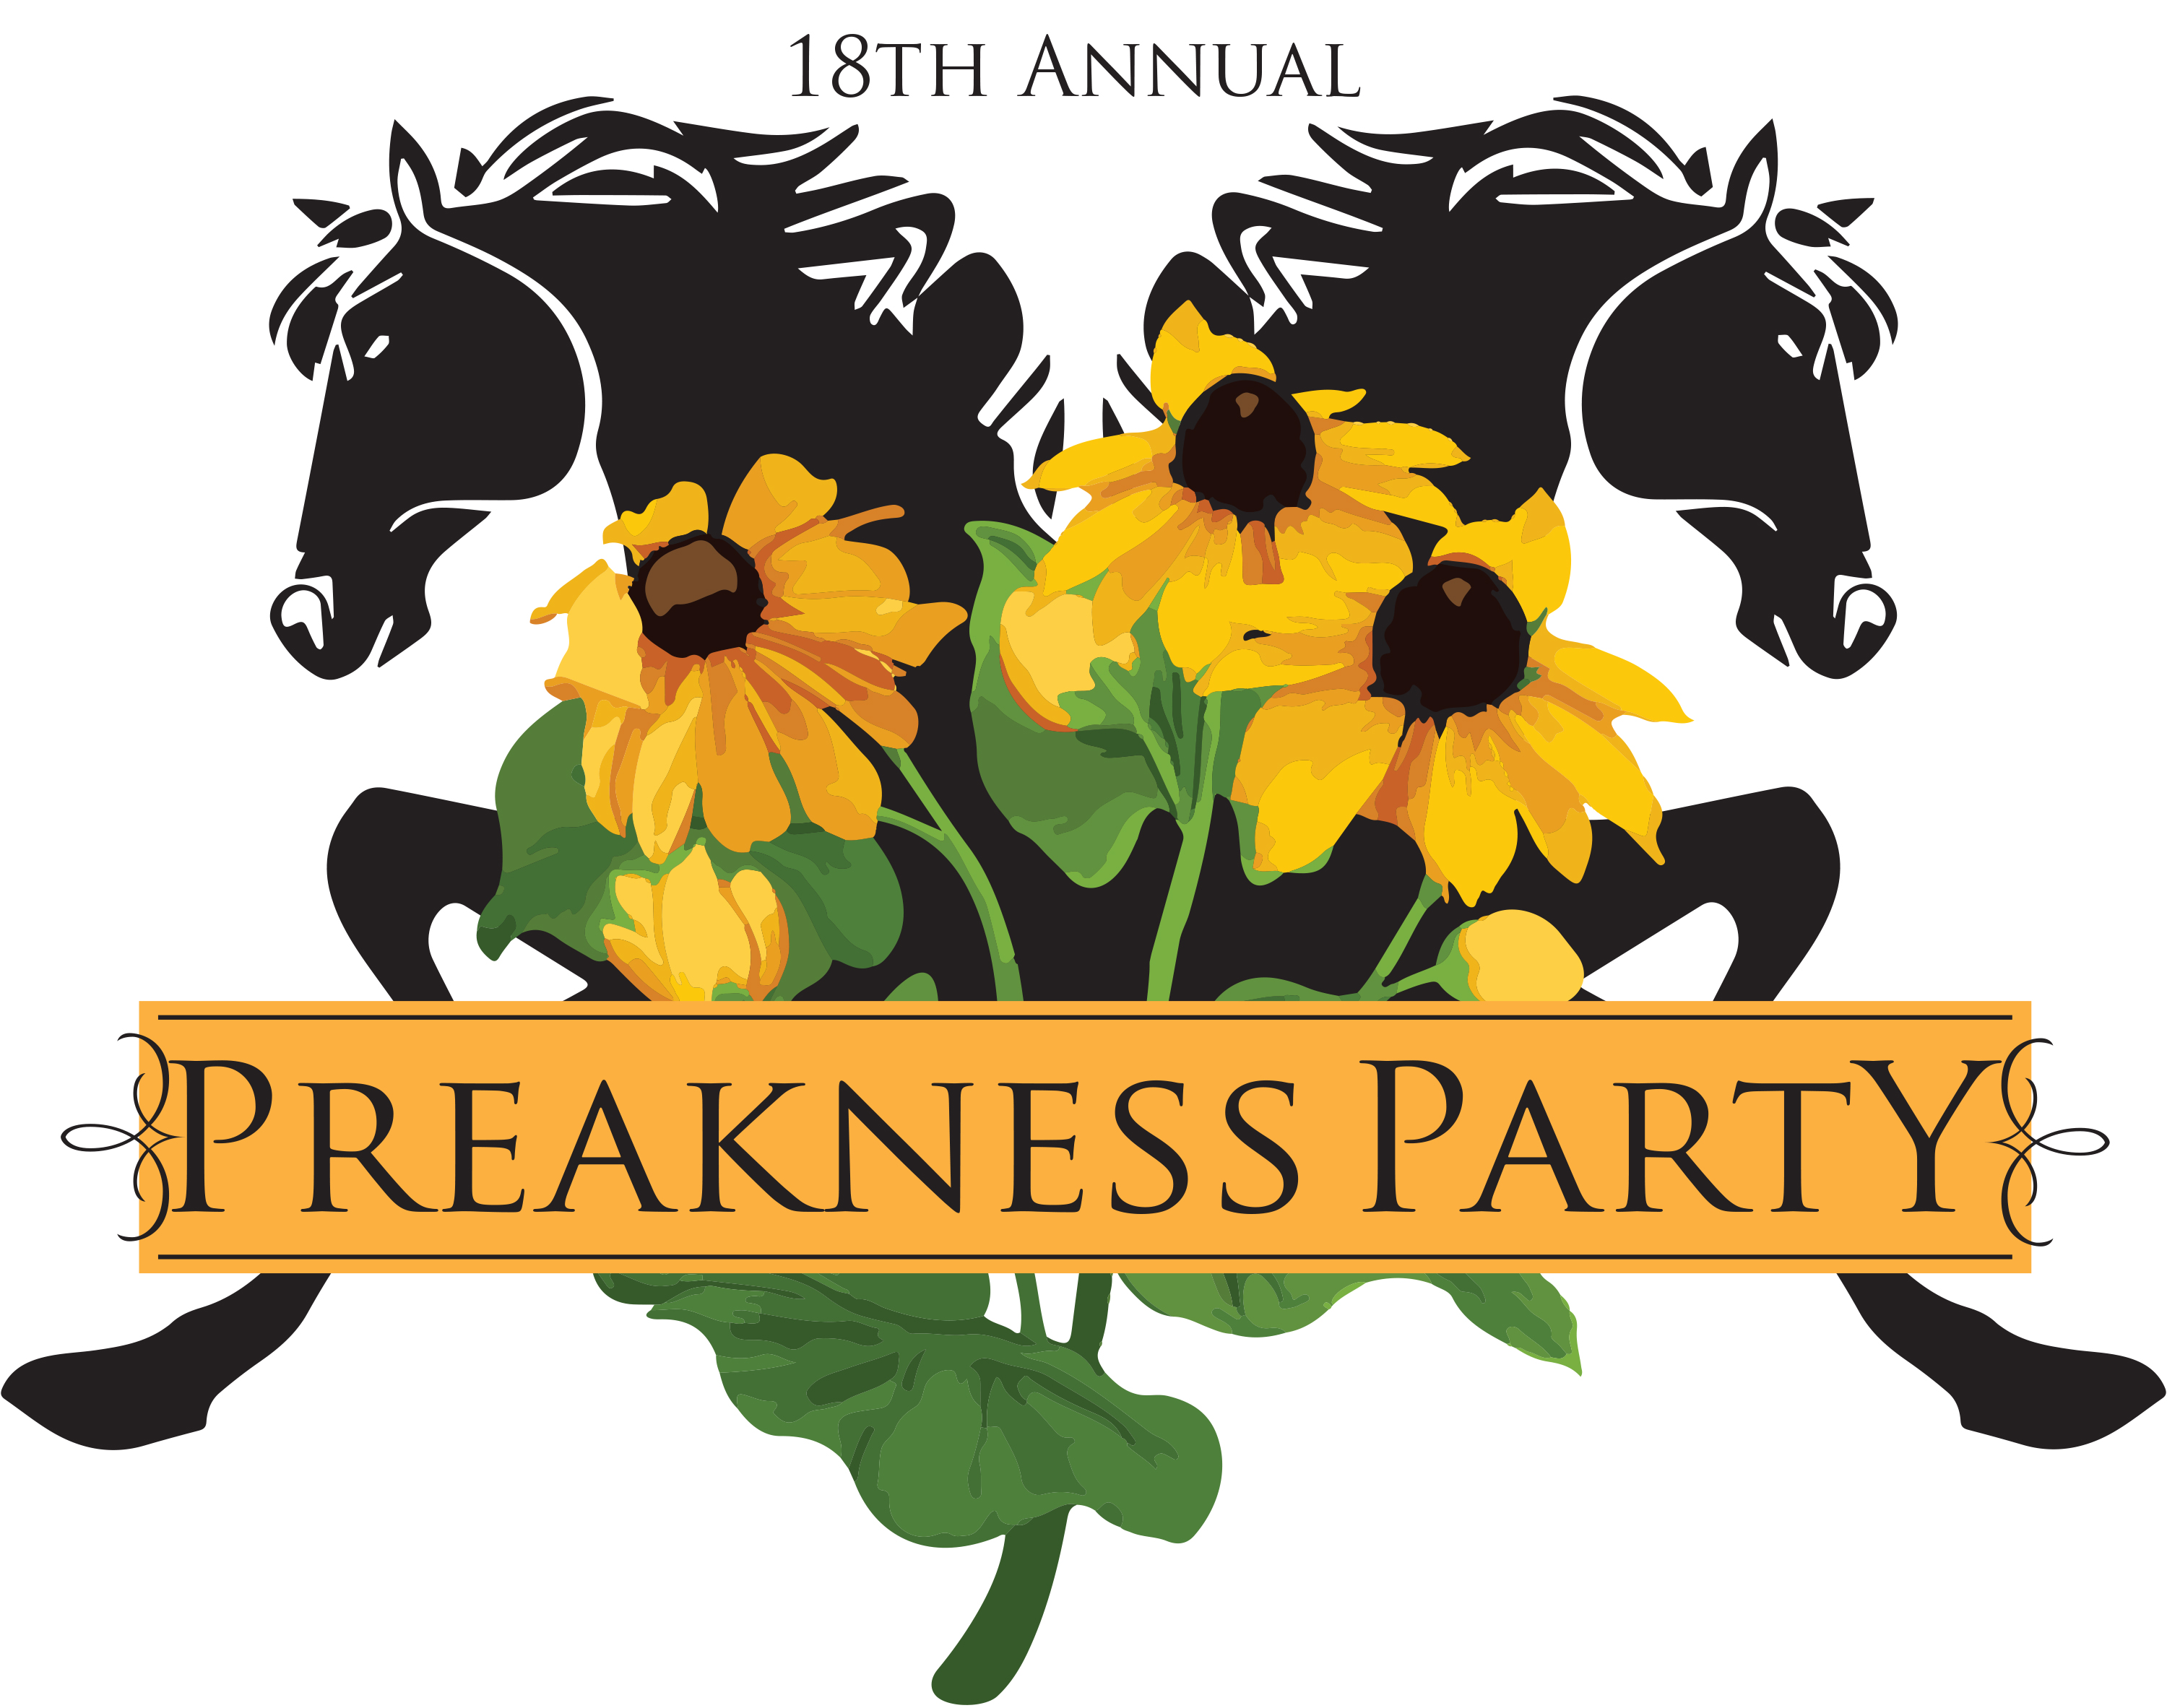 Preakness Party 2017